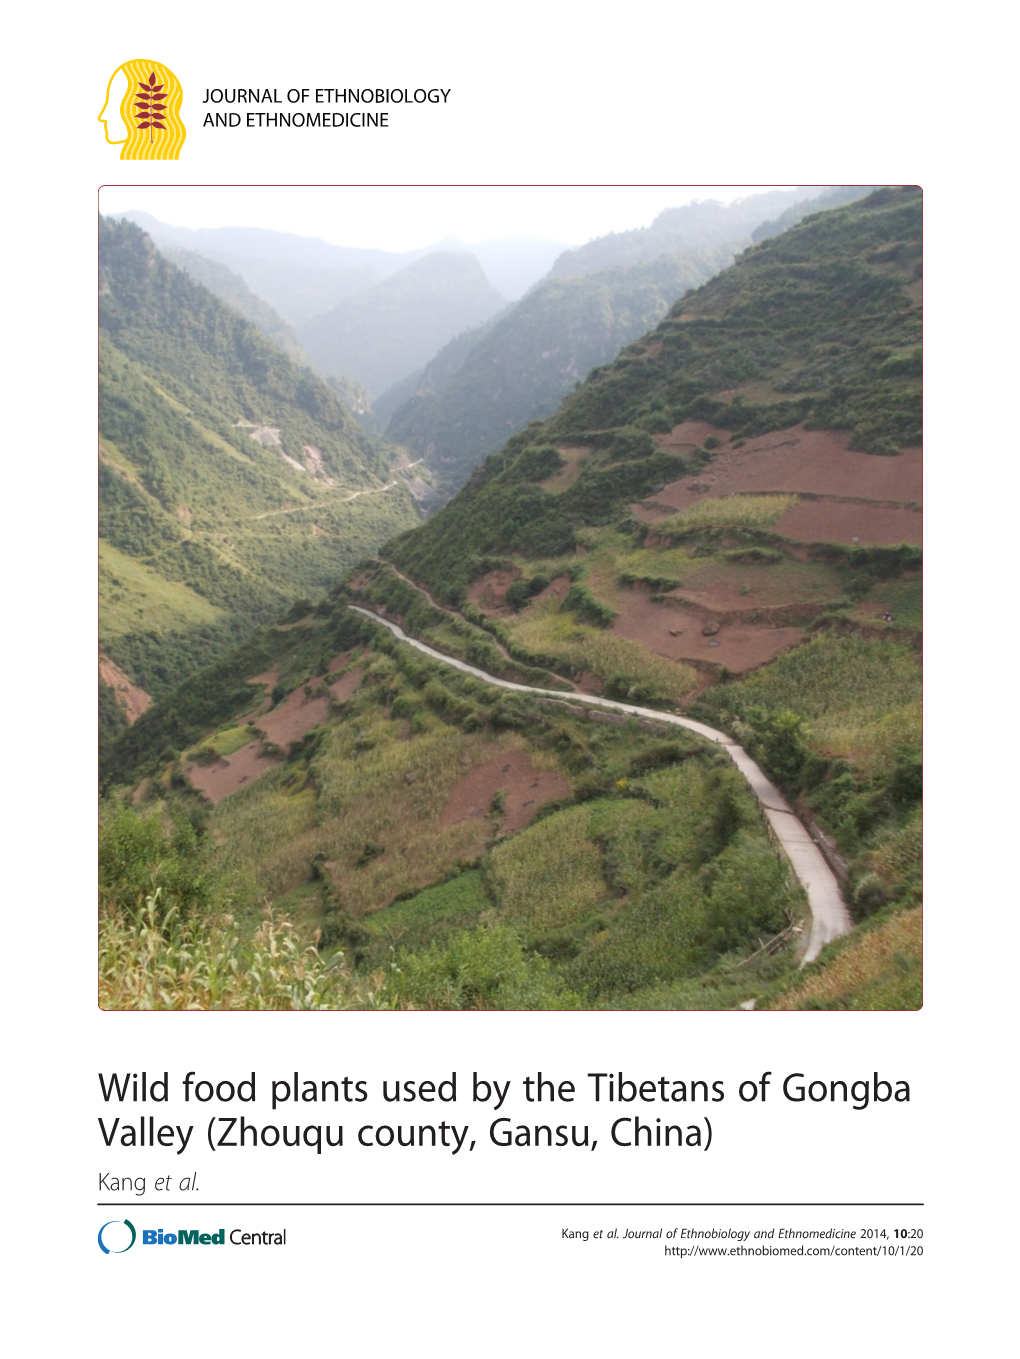 Wild Food Plants Used by the Tibetans of Gongba Valley (Zhouqu County, Gansu, China) Kang Et Al